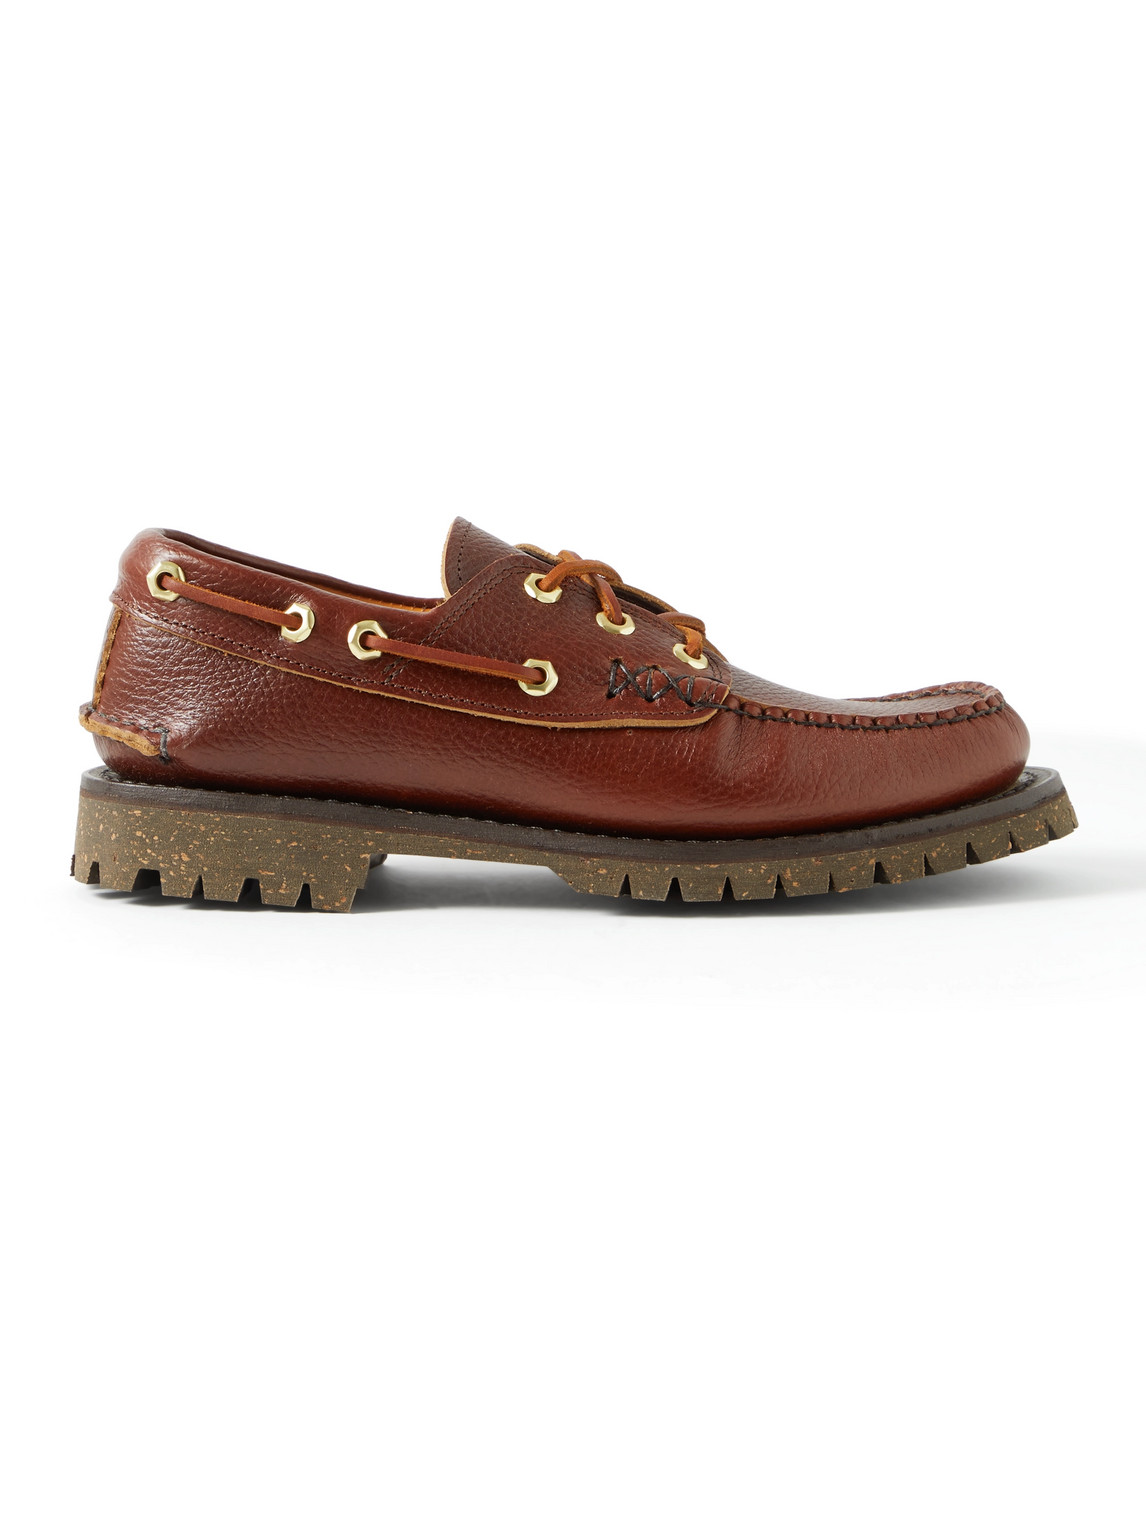 Full-Grain Leather Boat Shoes